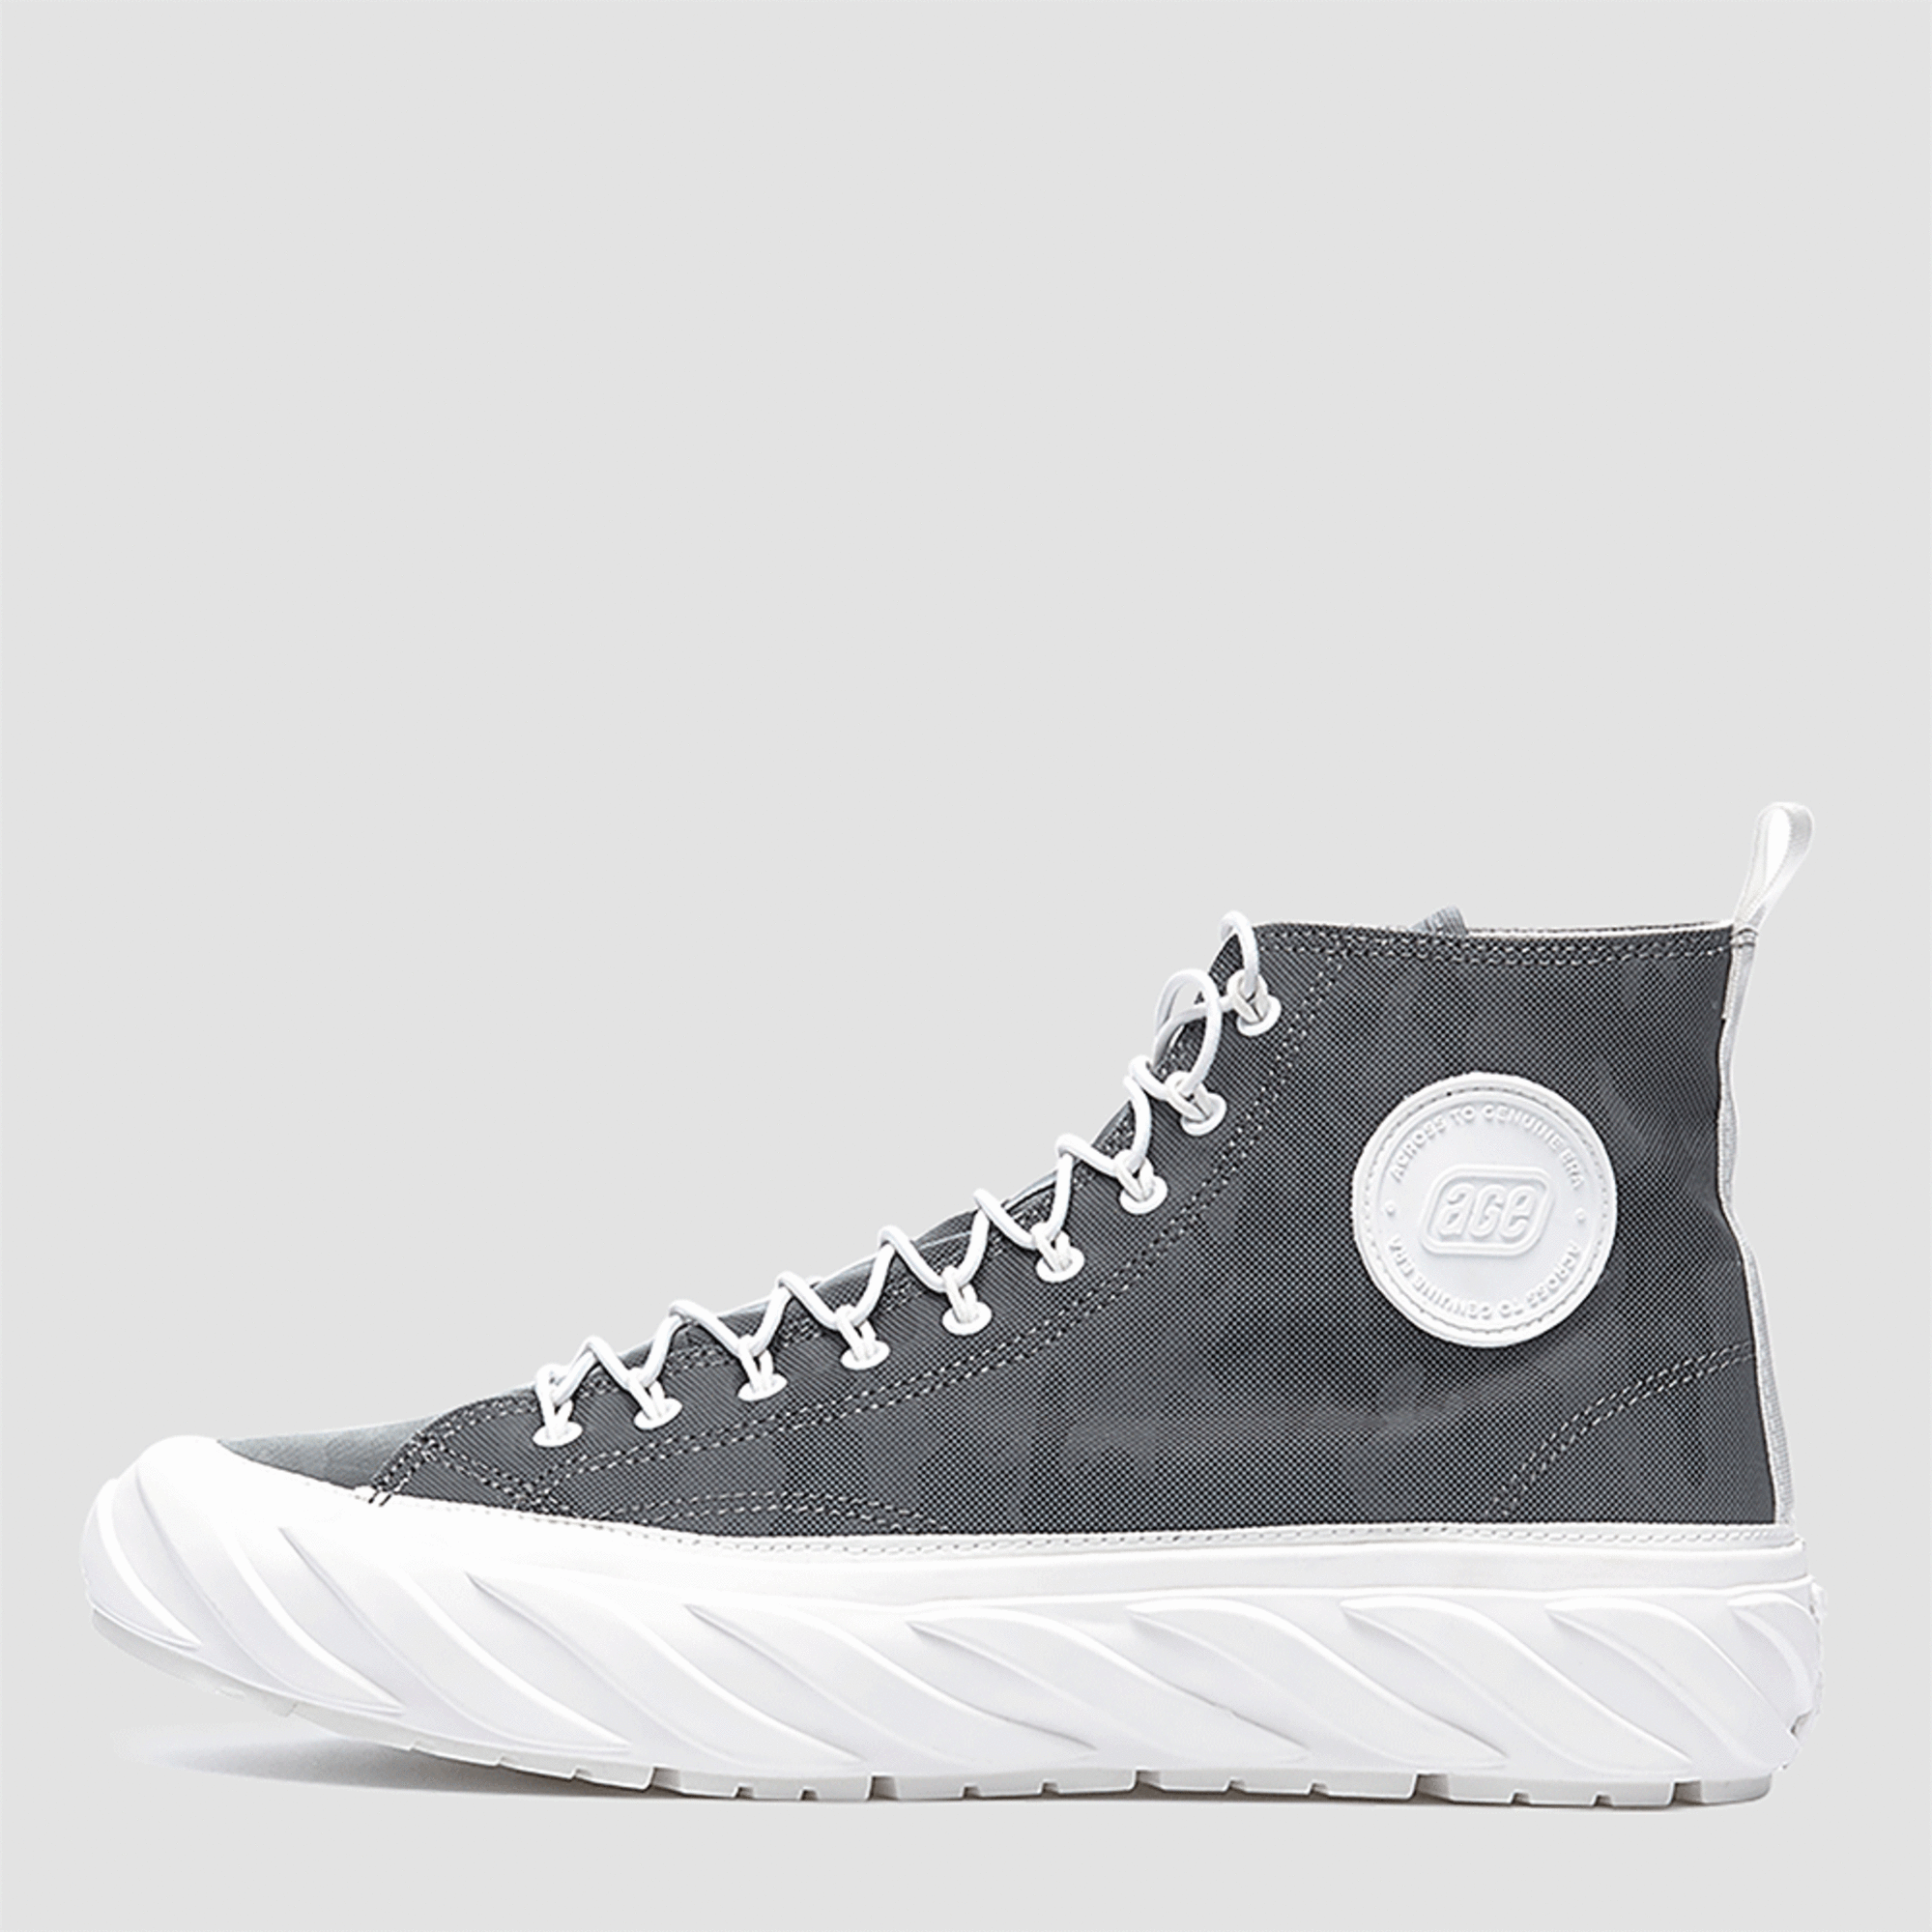 AGE TOP SNEAKERS REFLECTIVE CAMO